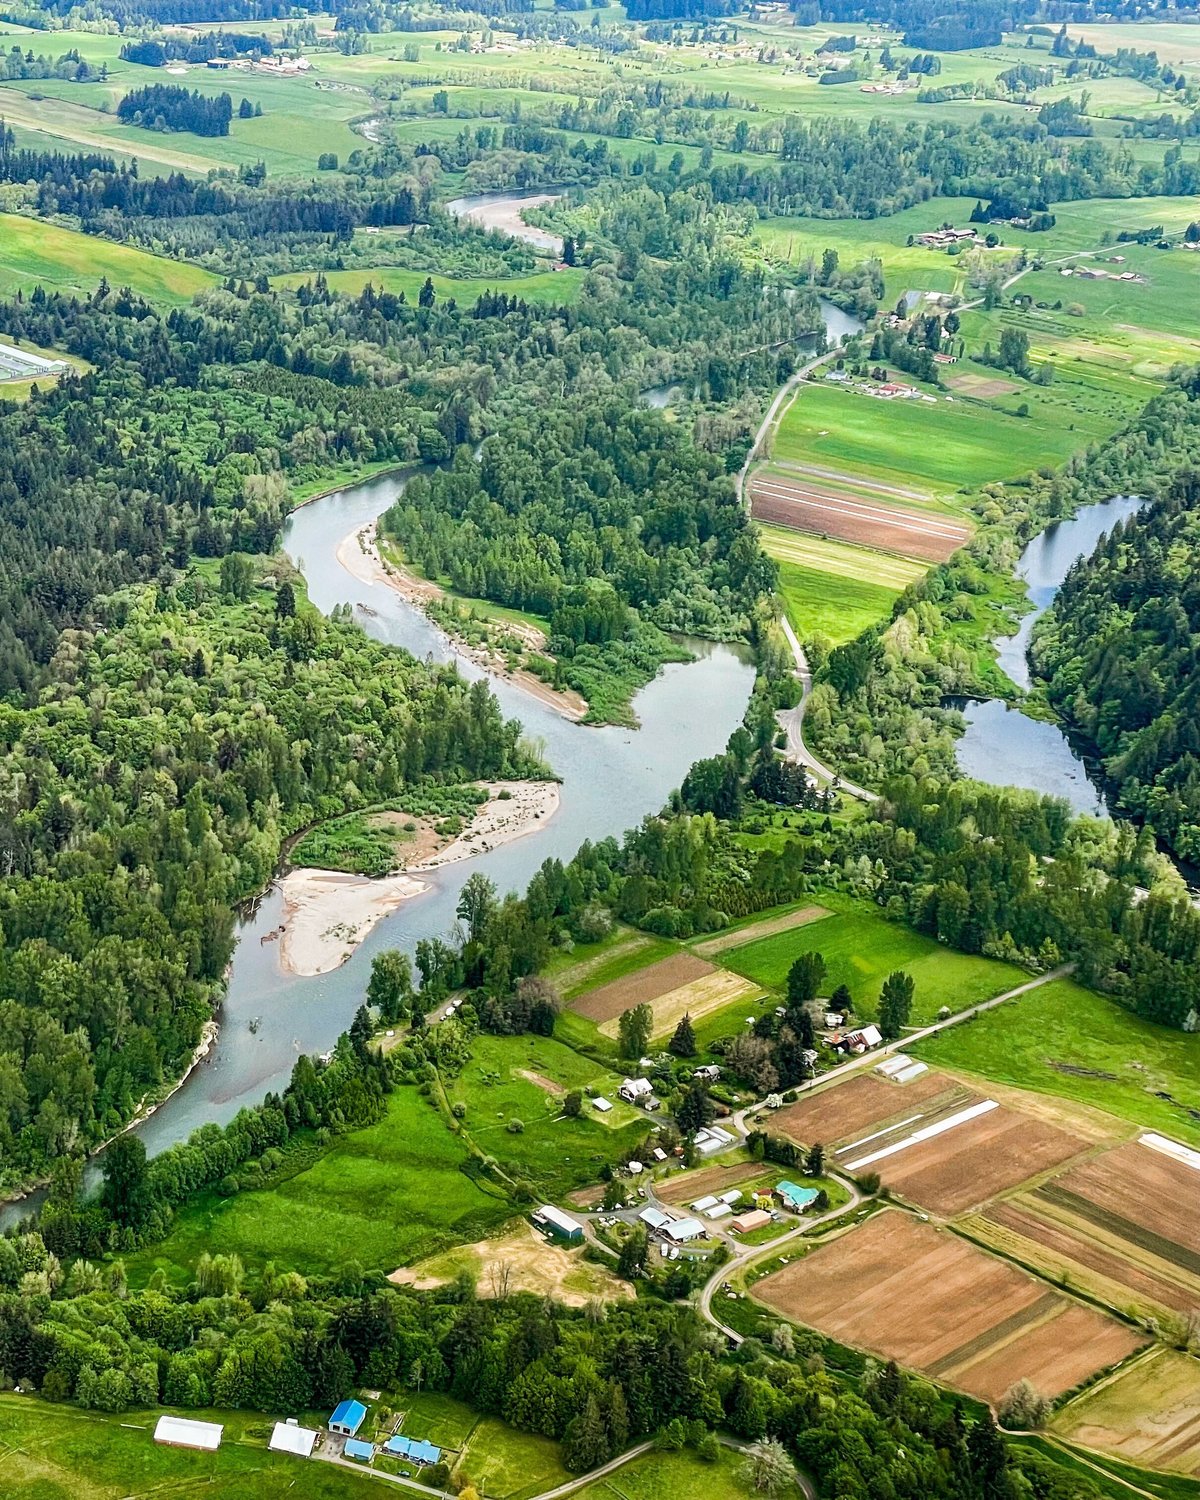 The Chehalis River flows near farms in the Independence Valley.